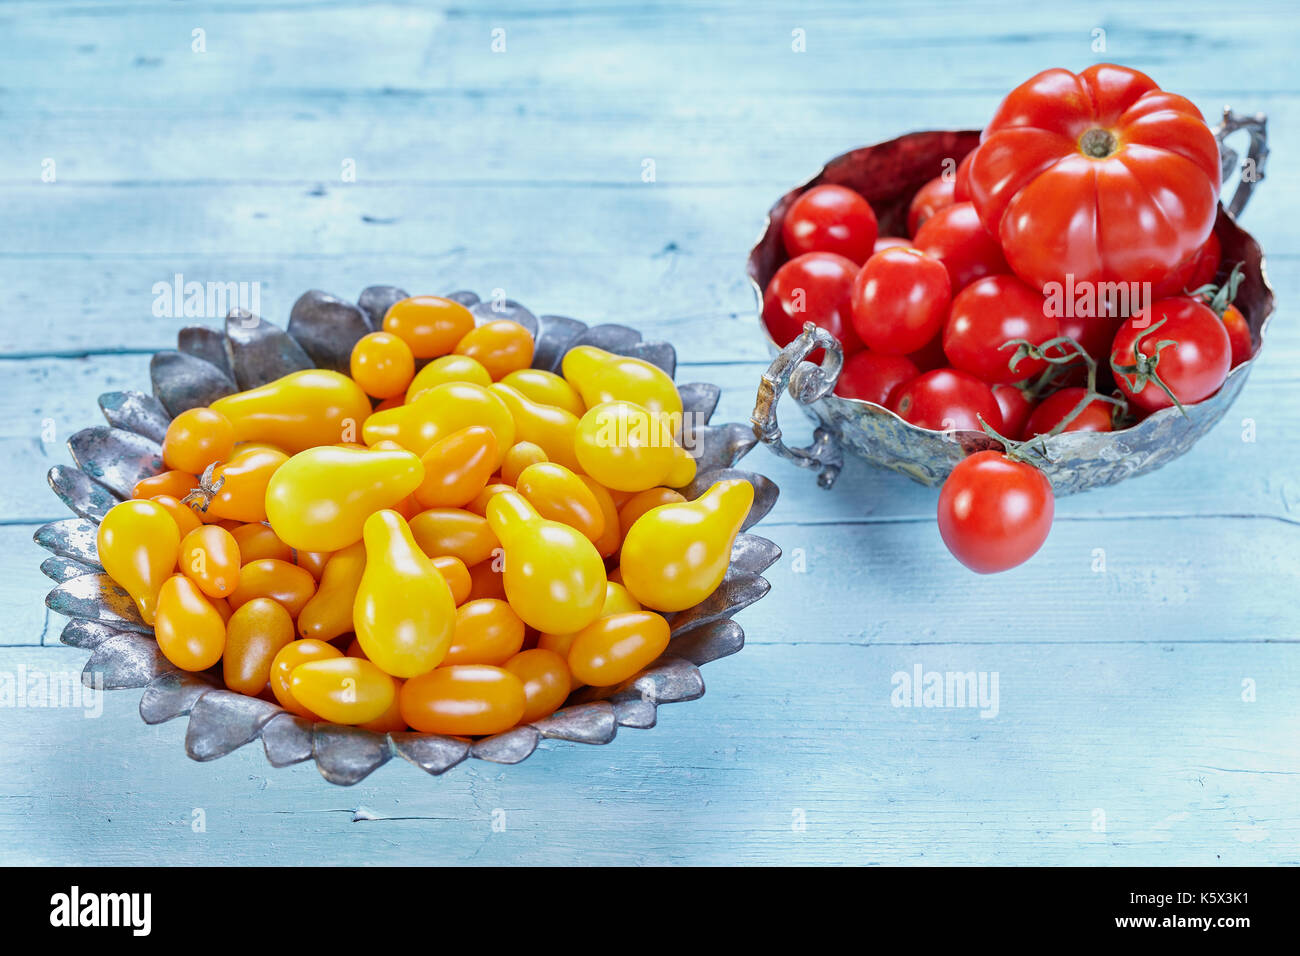 Varieties of tomatoes: yellow pear cherry, plum or datterino cherry, red cherry and beefstick tomato, on light blue wooden background. Stock Photo